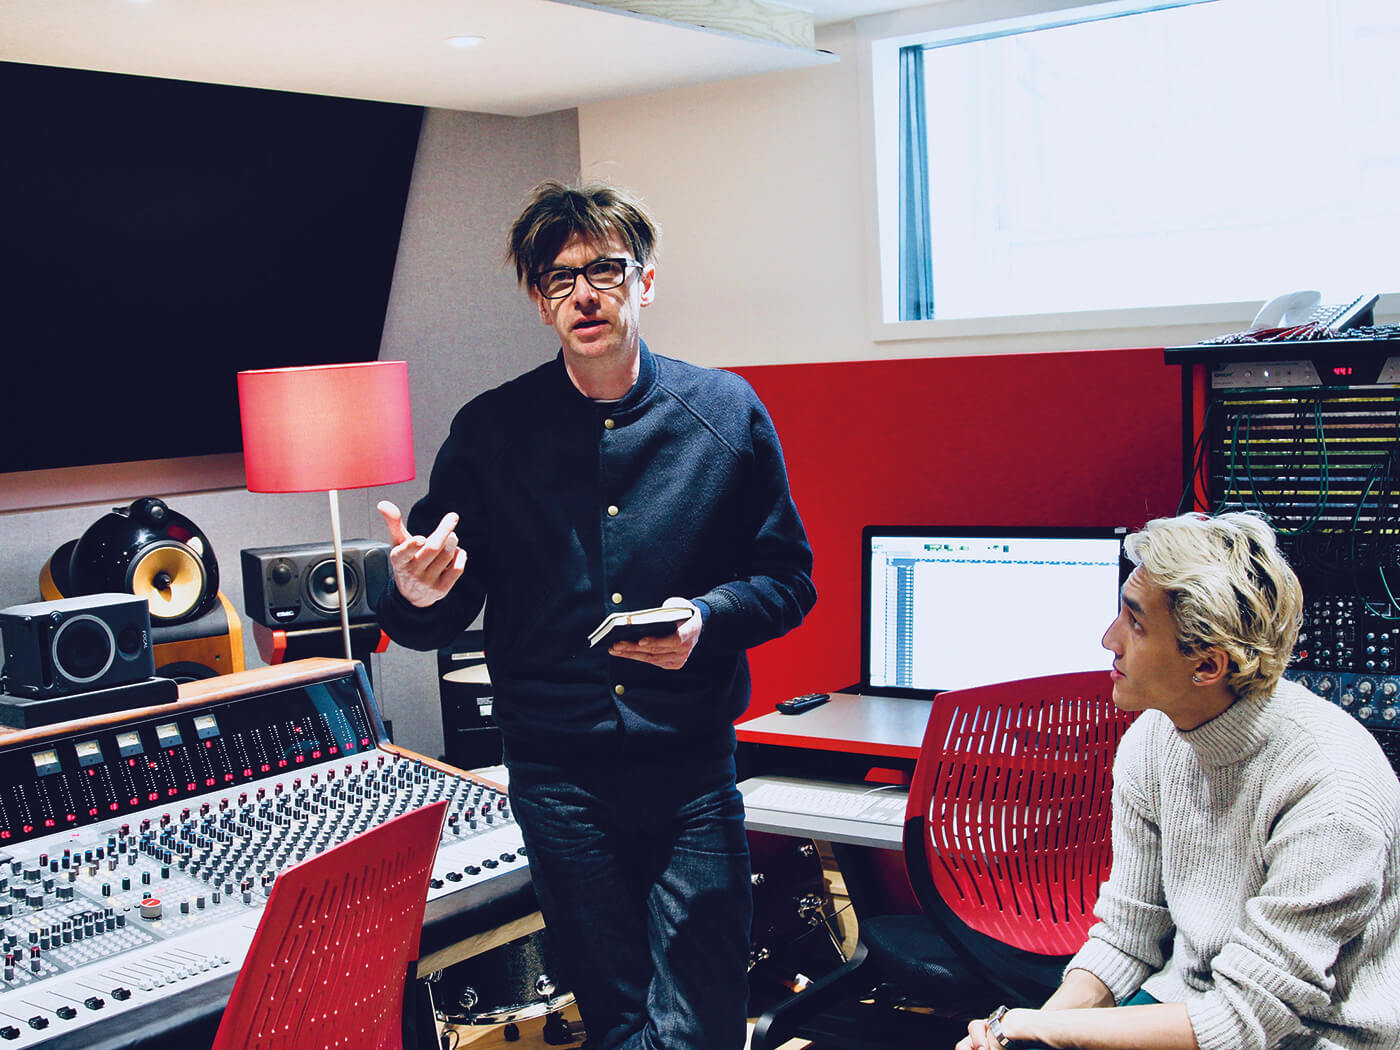 100 music production tips from the pros to improve your tracks